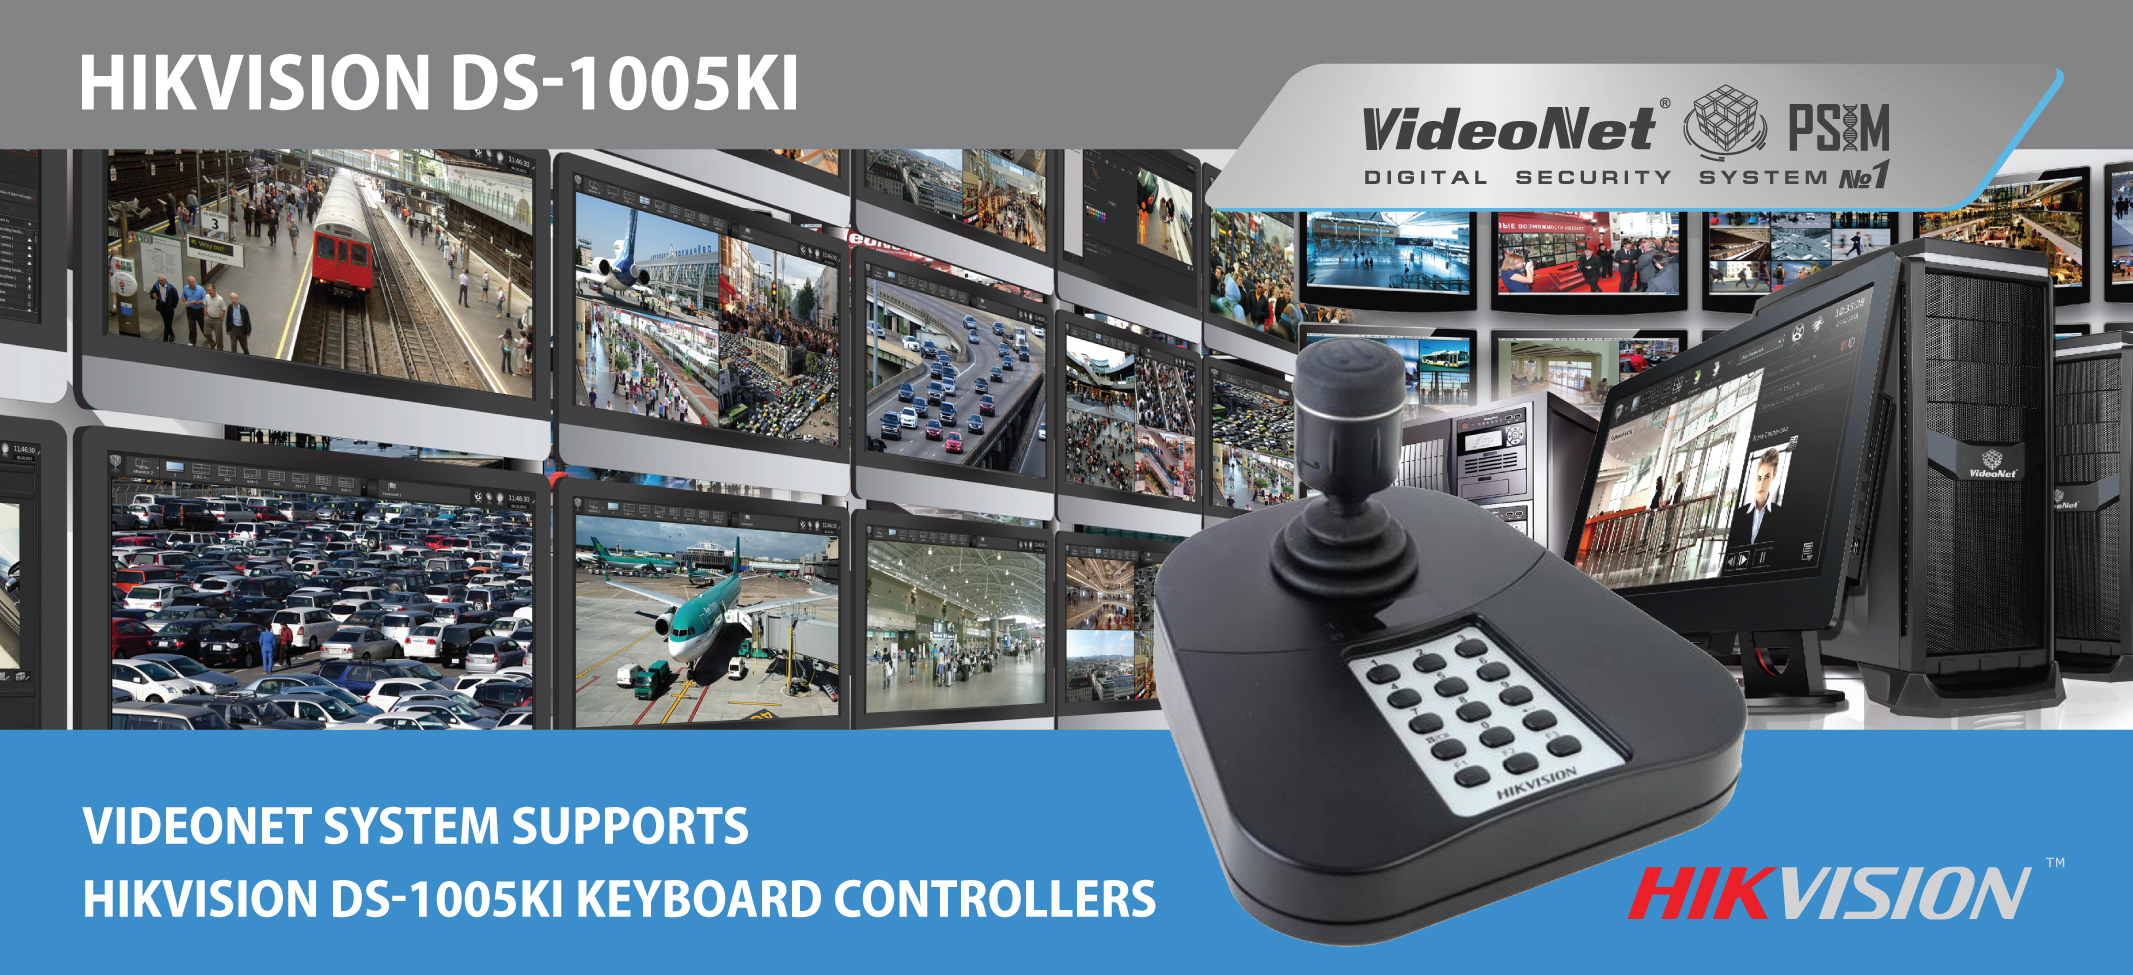 Video walls and PTZ cameras management using keyboard controllers